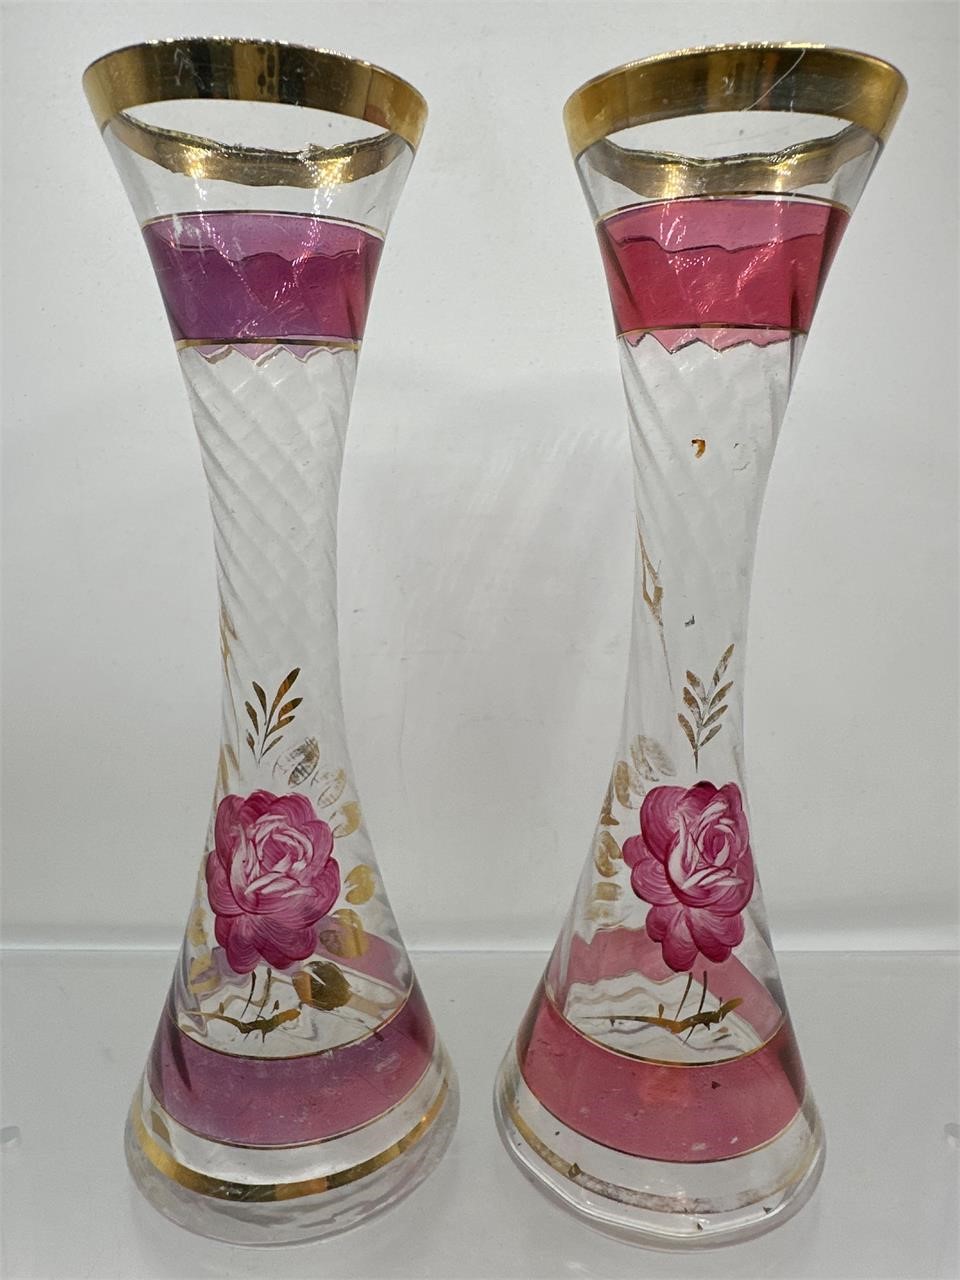 Rose painted glass bud vases